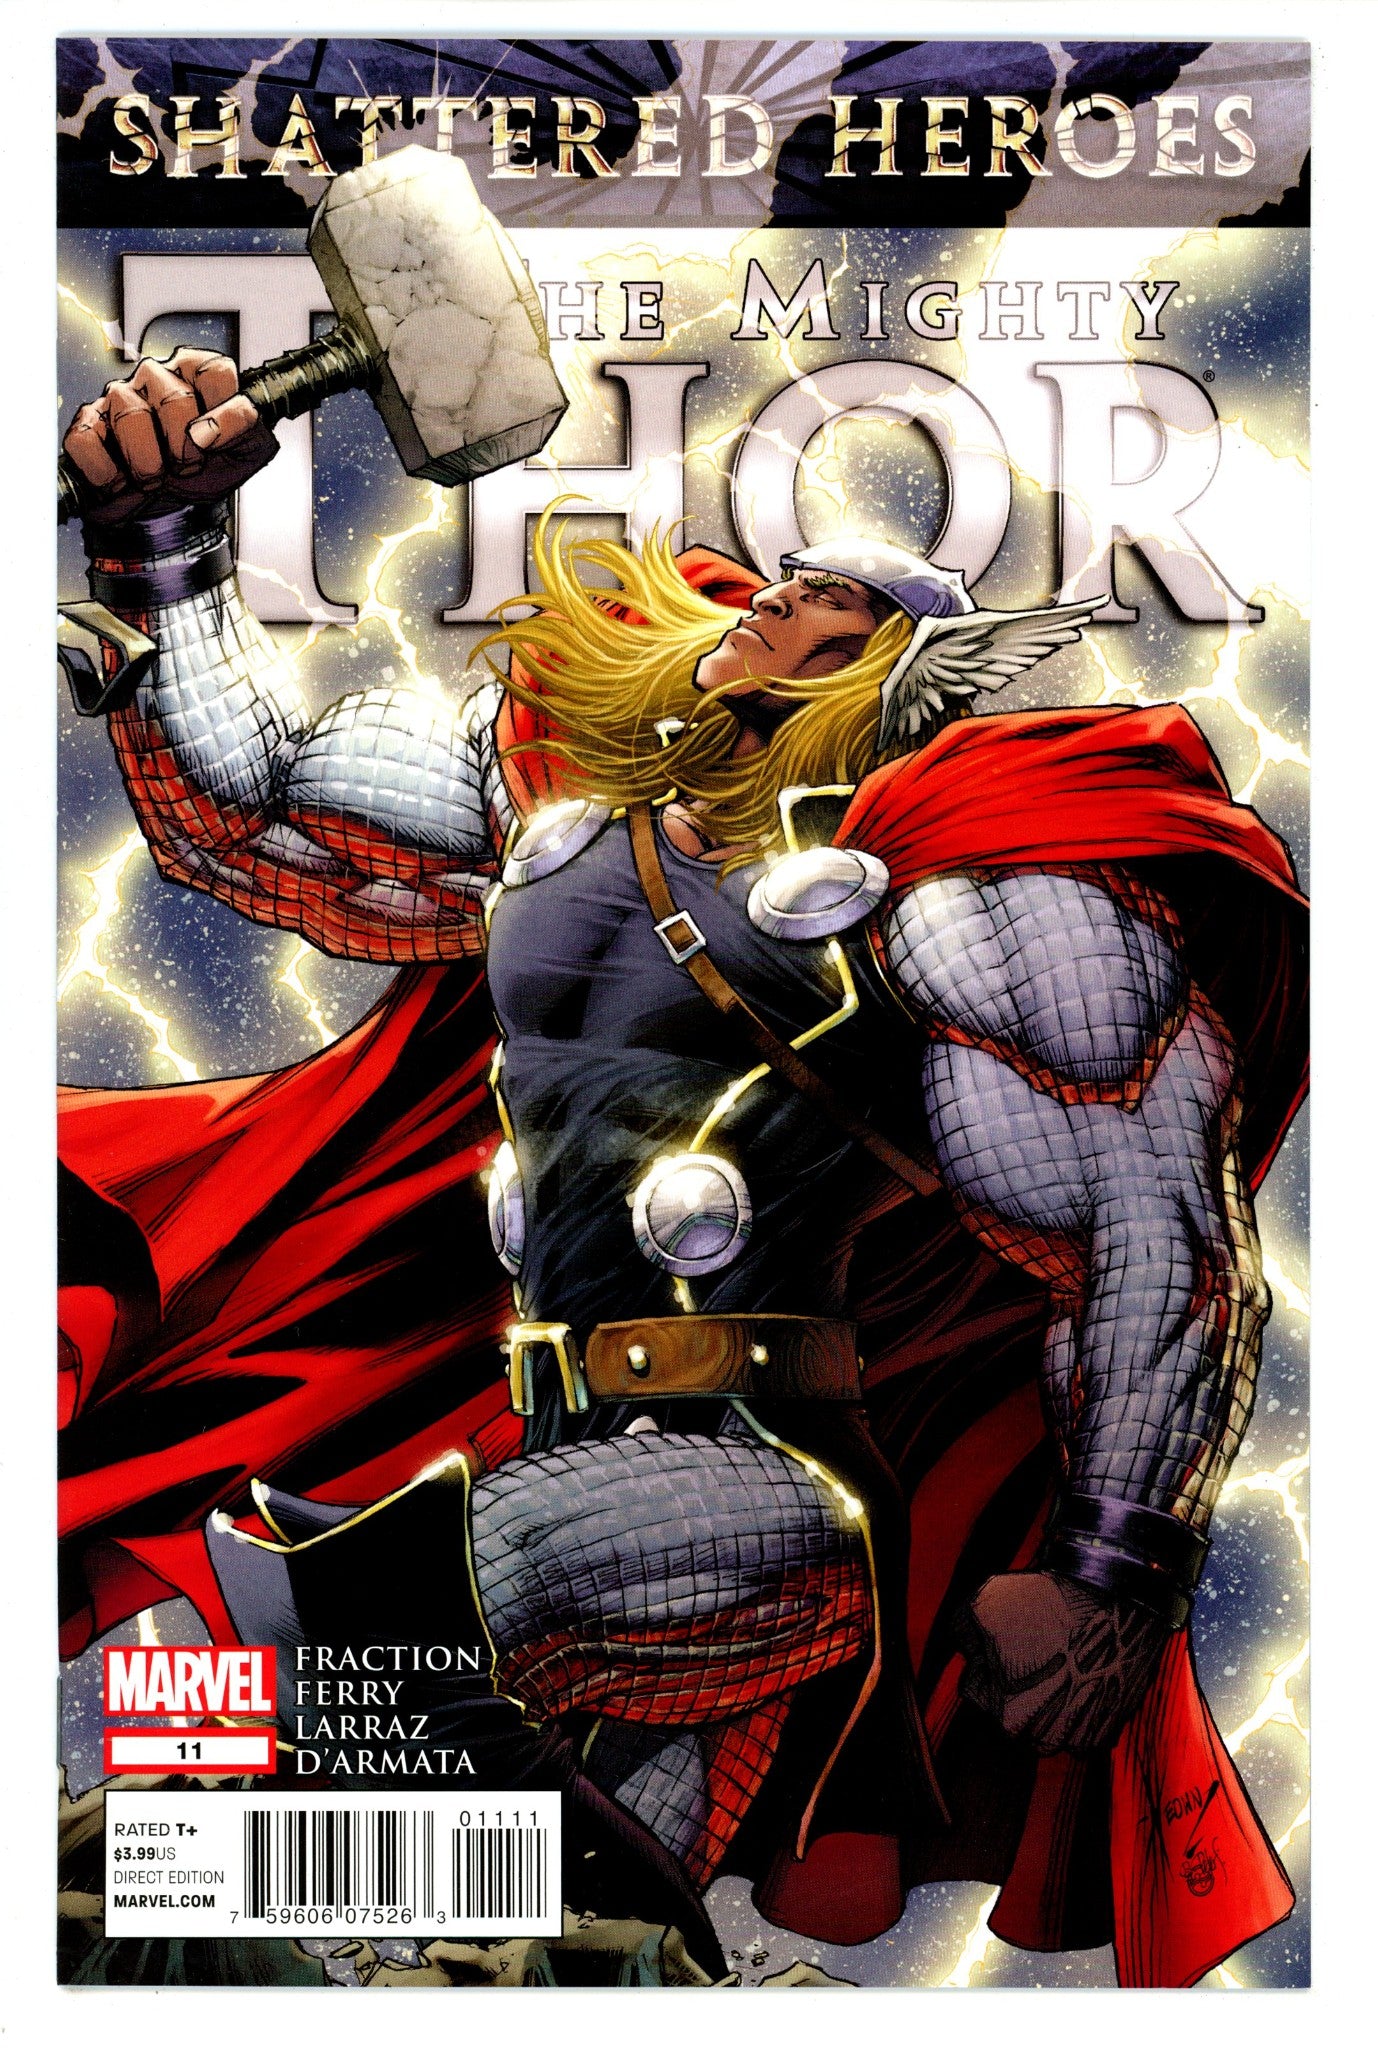 The Mighty Thor Vol 1 11 High Grade (2012) 